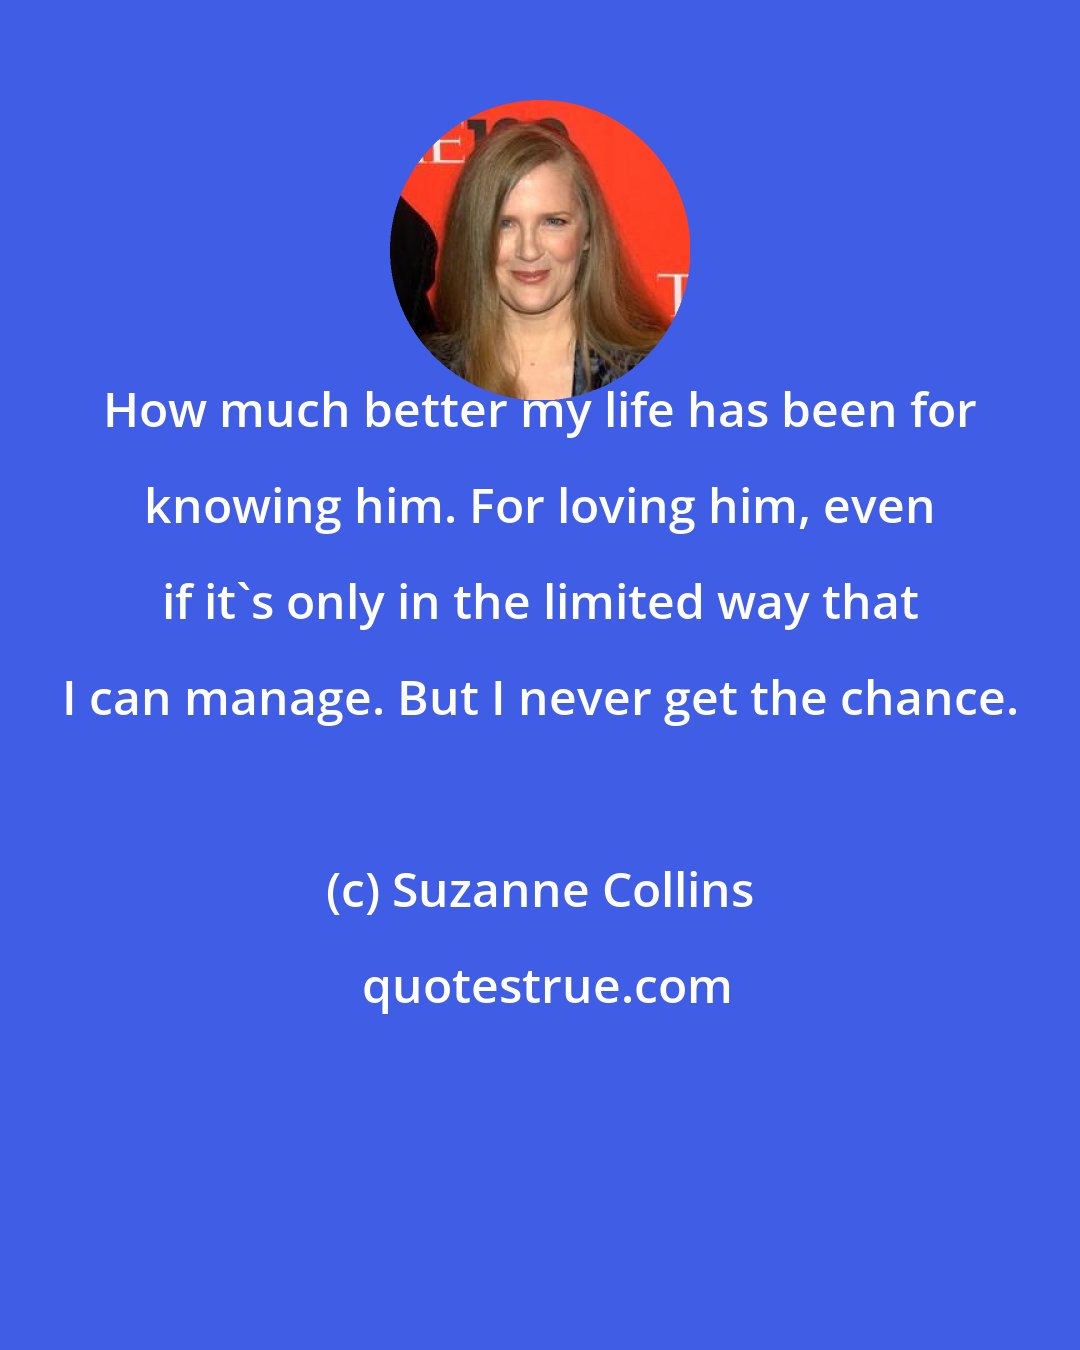 Suzanne Collins: How much better my life has been for knowing him. For loving him, even if it's only in the limited way that I can manage. But I never get the chance.